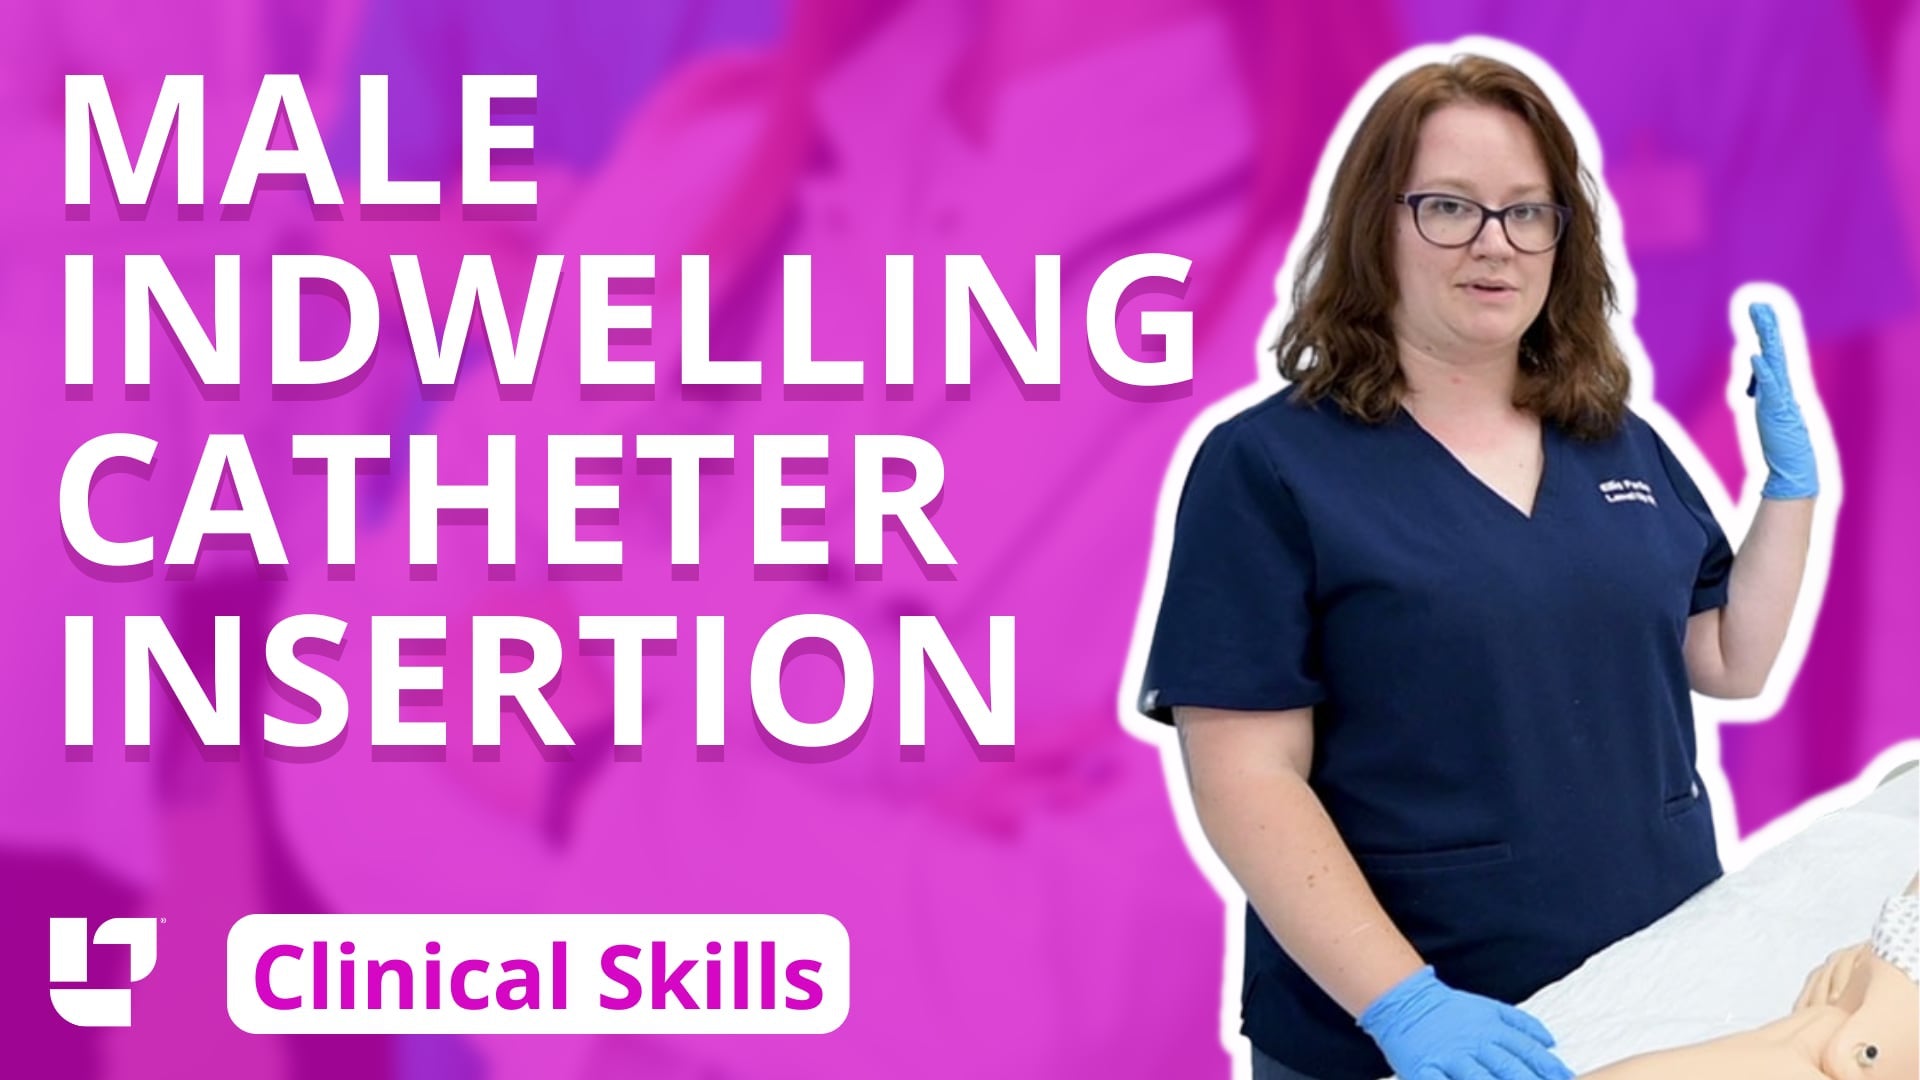 Clinical Skills - Indwelling Urinary Catheter Insertion (Male) - LevelUpRN